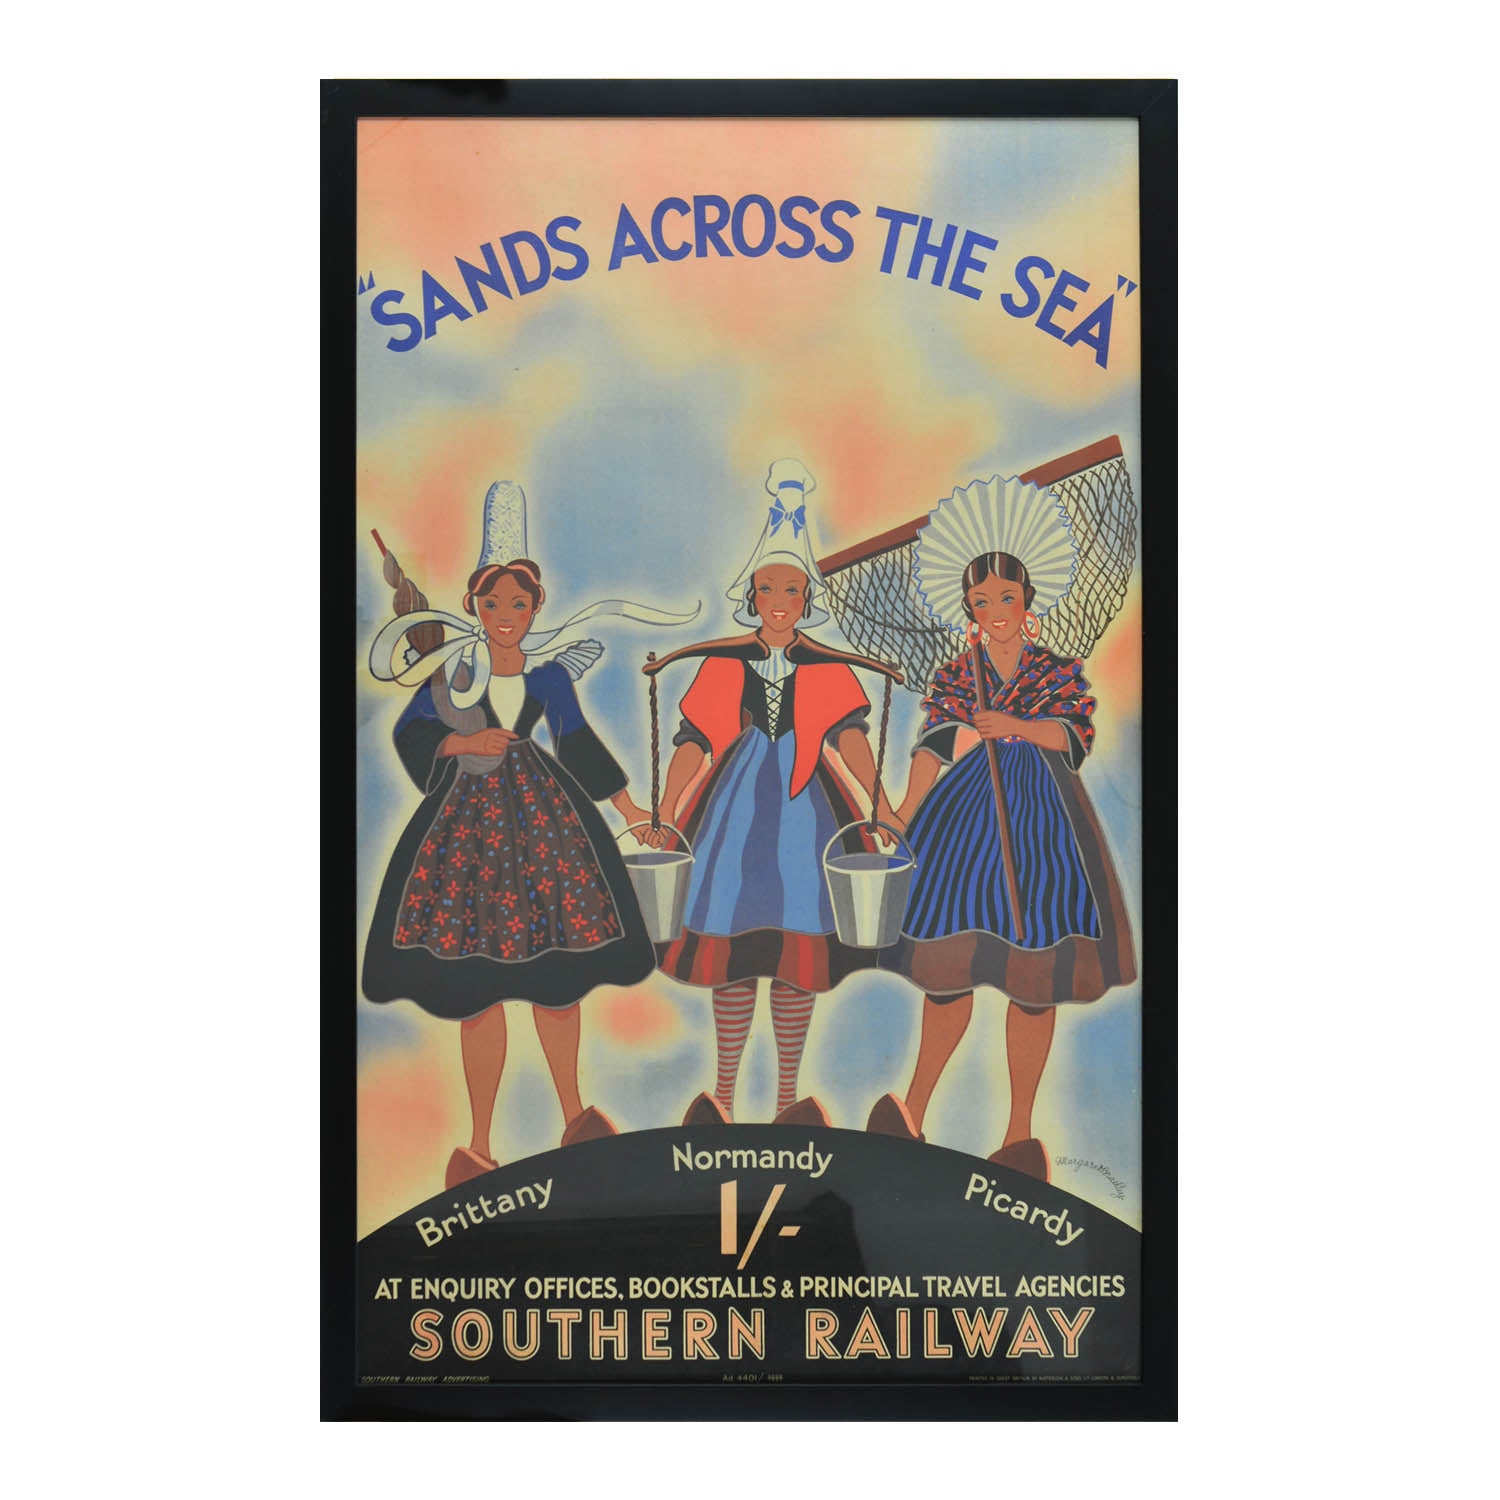 An original Southern Railway travel poster, Sands Across the Sea, by Margaret Bradley, 1937.  The design features three women wearing traditional costumes associated with Brittany, Normandy and Picardy.